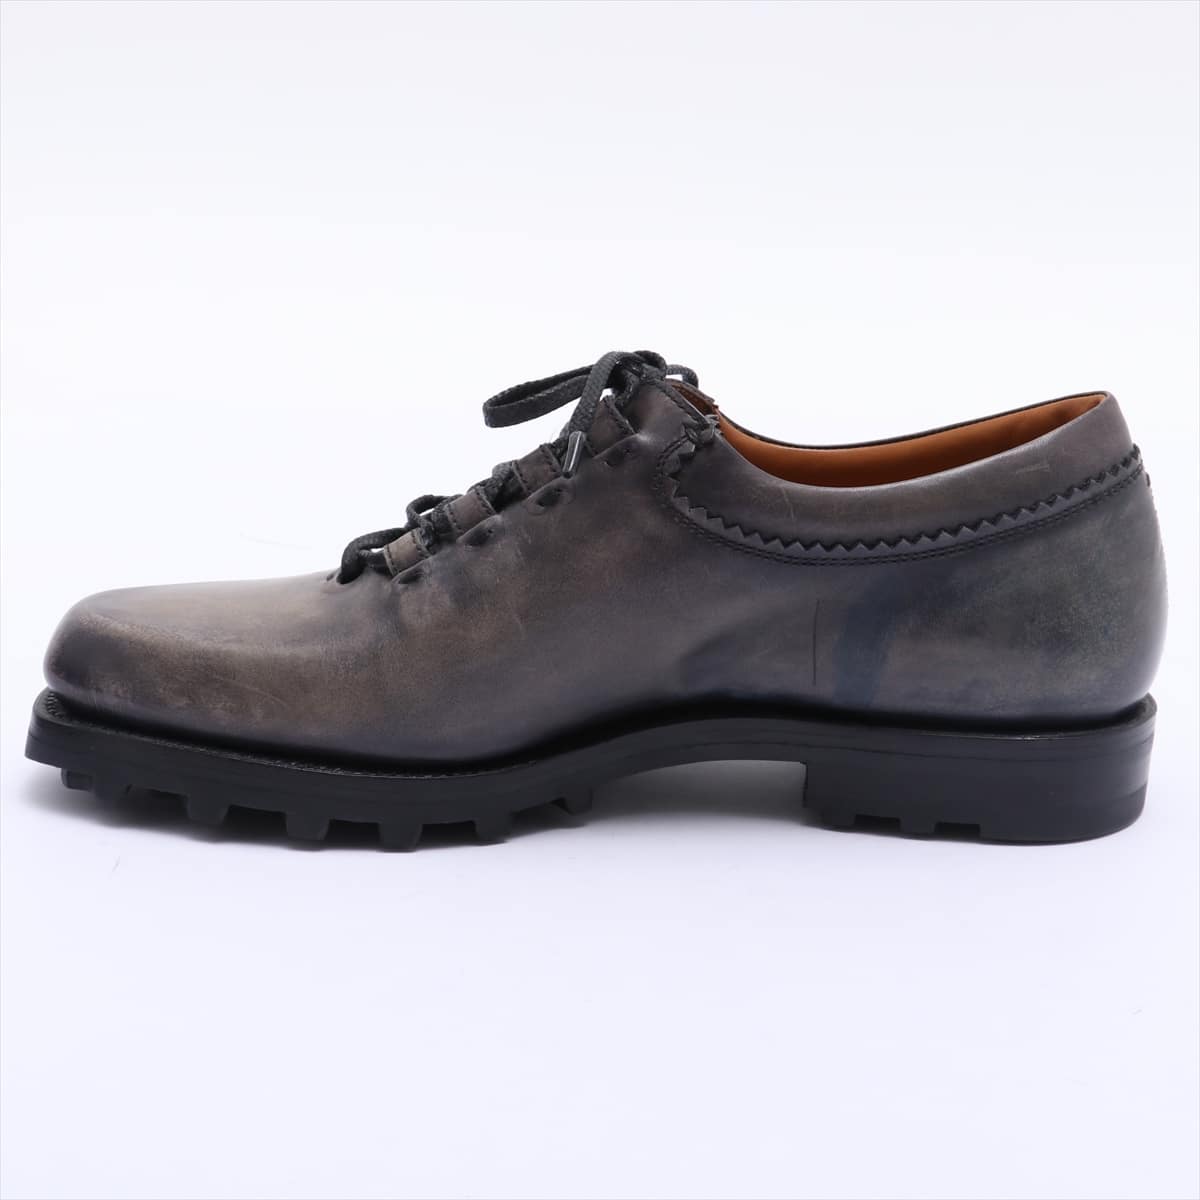 Berluti Leather Shoes 6.5 Men's Grey New Ultima Udine